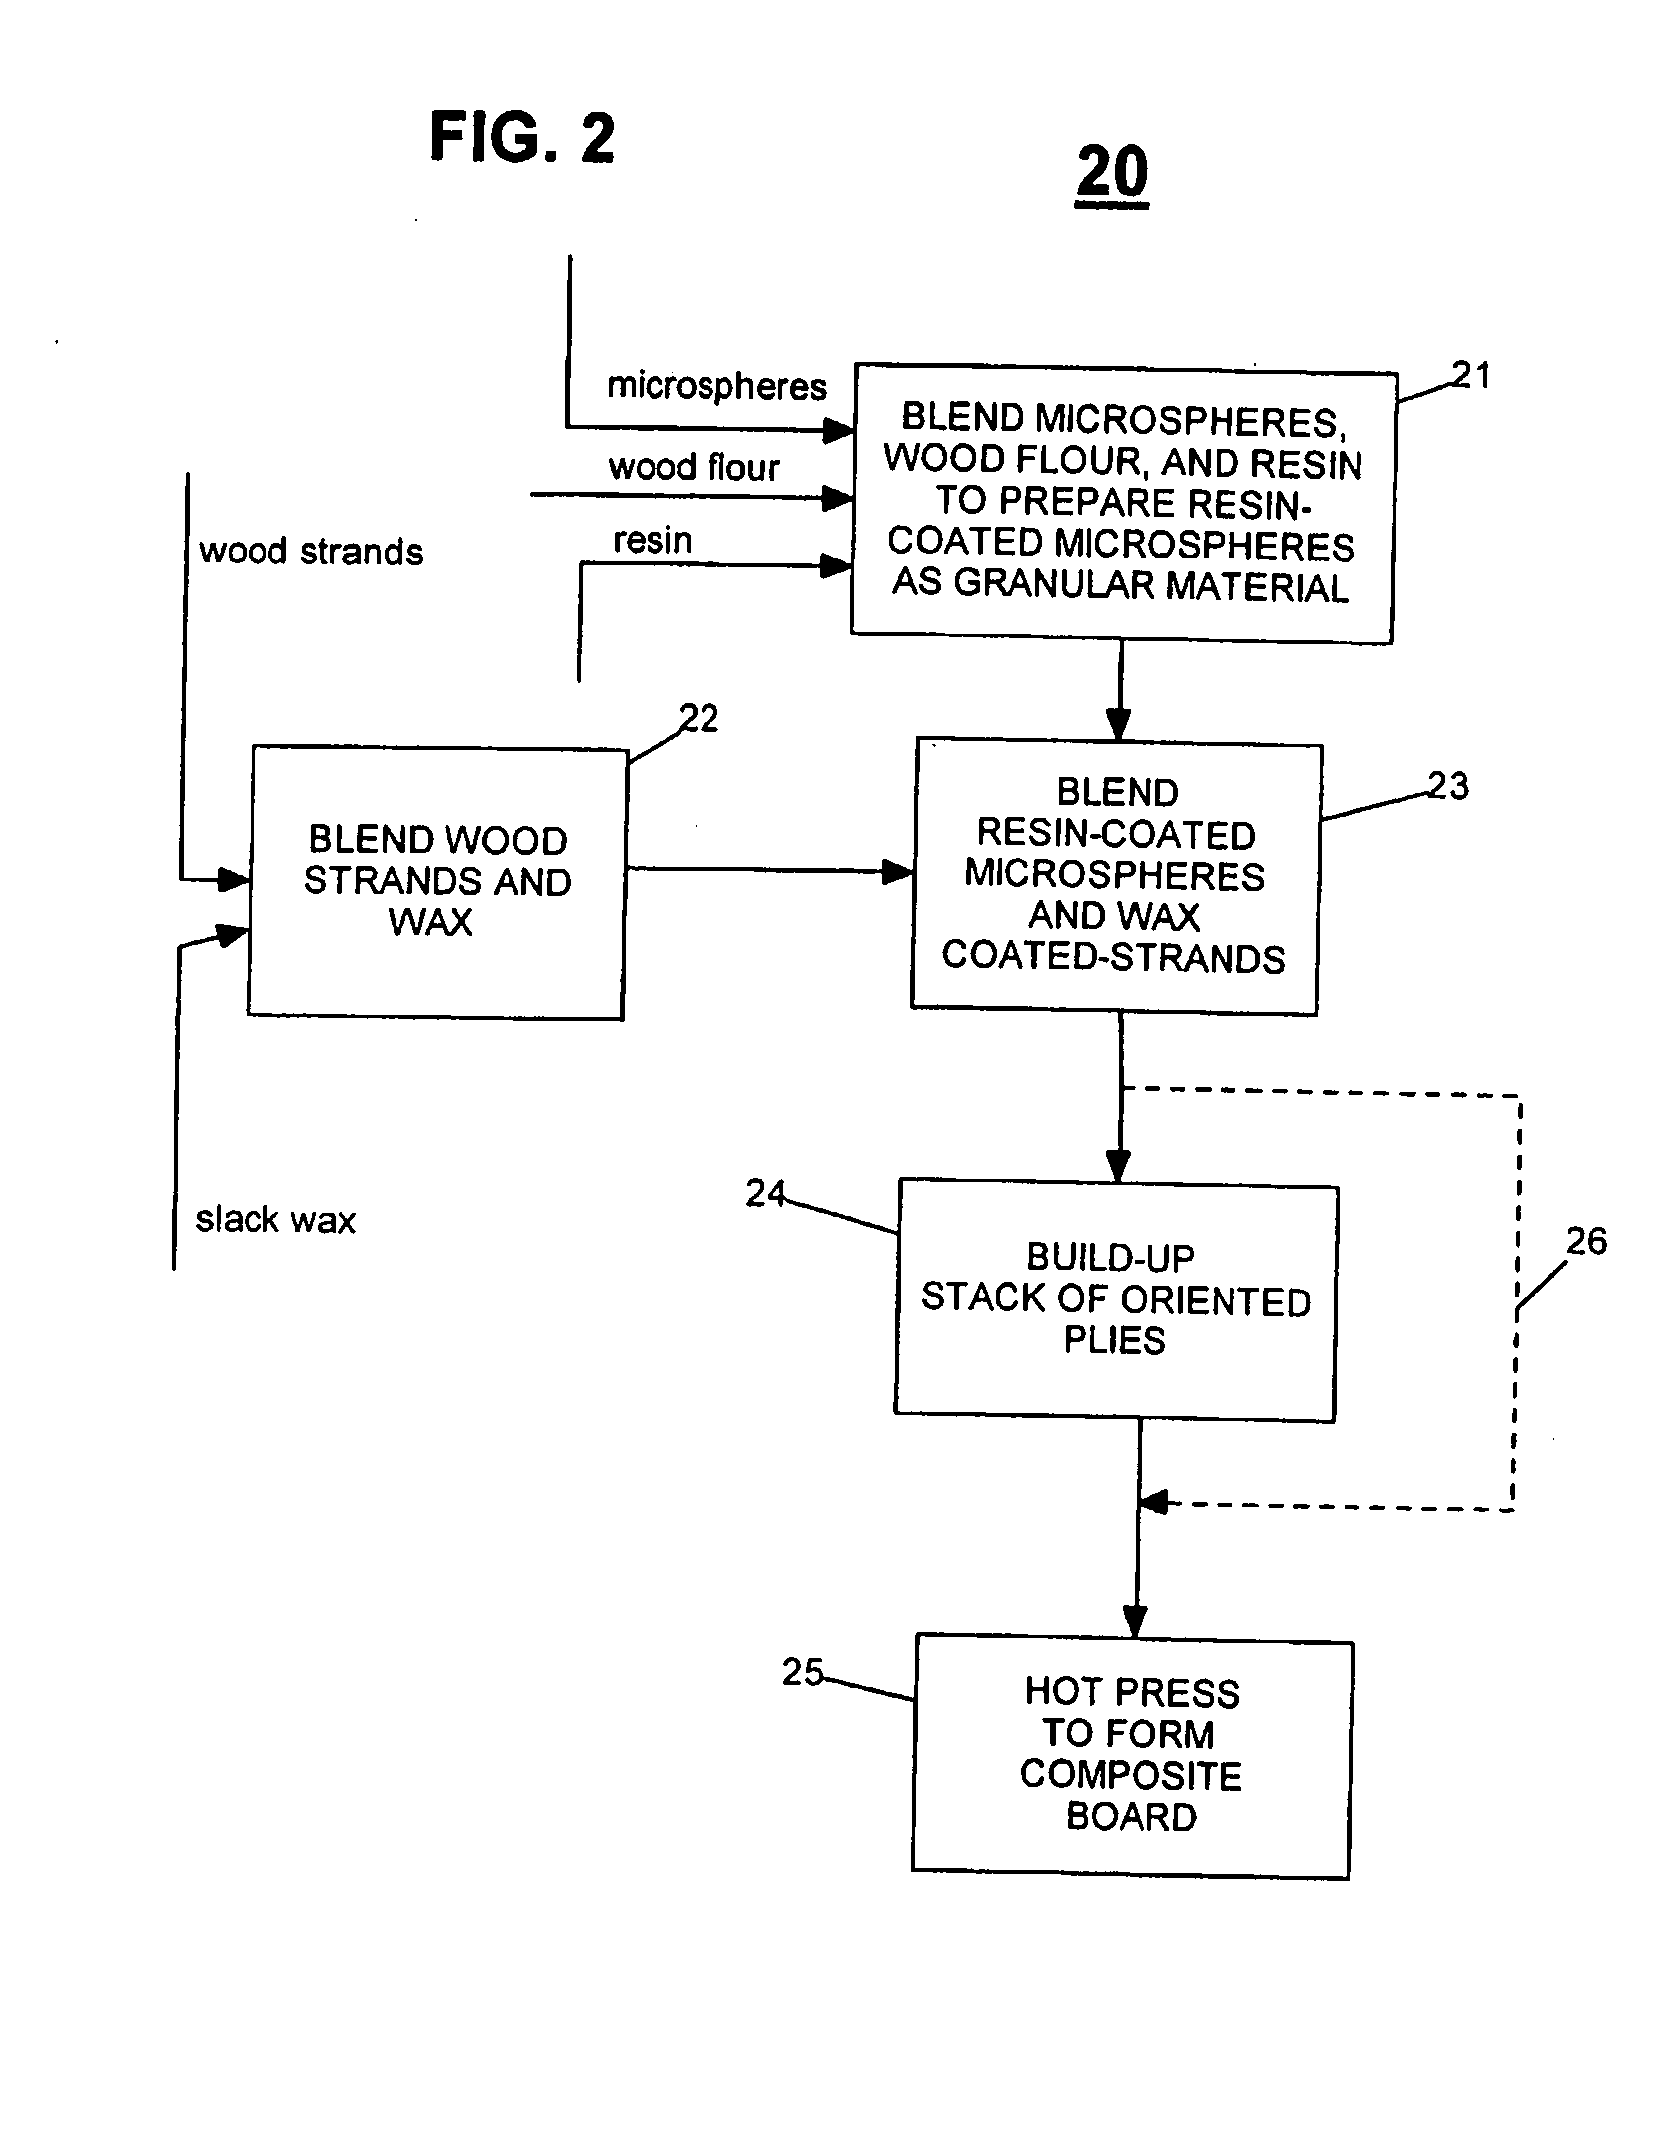 Strength-enhanced, lightweight lignocellulosic composite board materials and methods of their manufacture